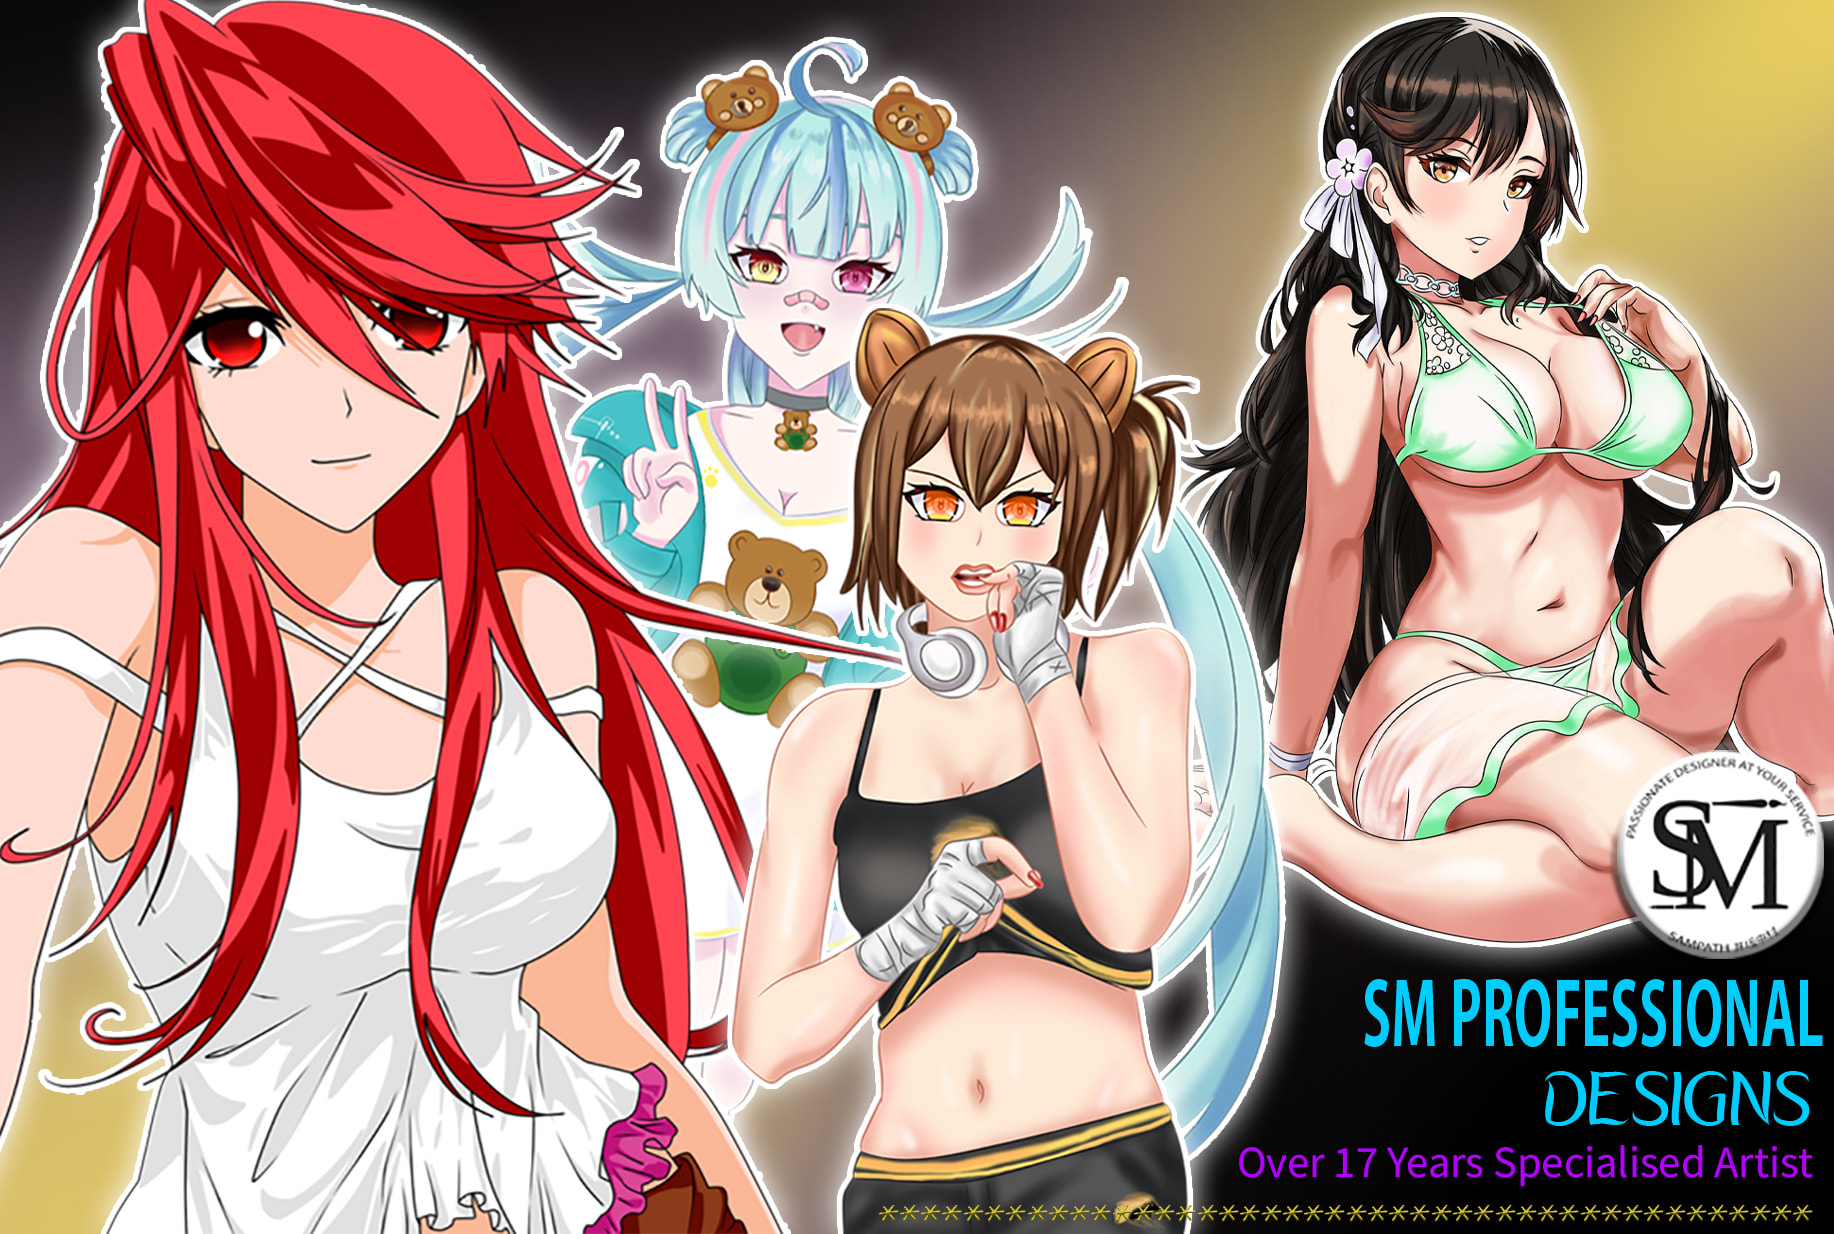 draw anime characters, design, manga or video game, fanart, nsfw,  illustration